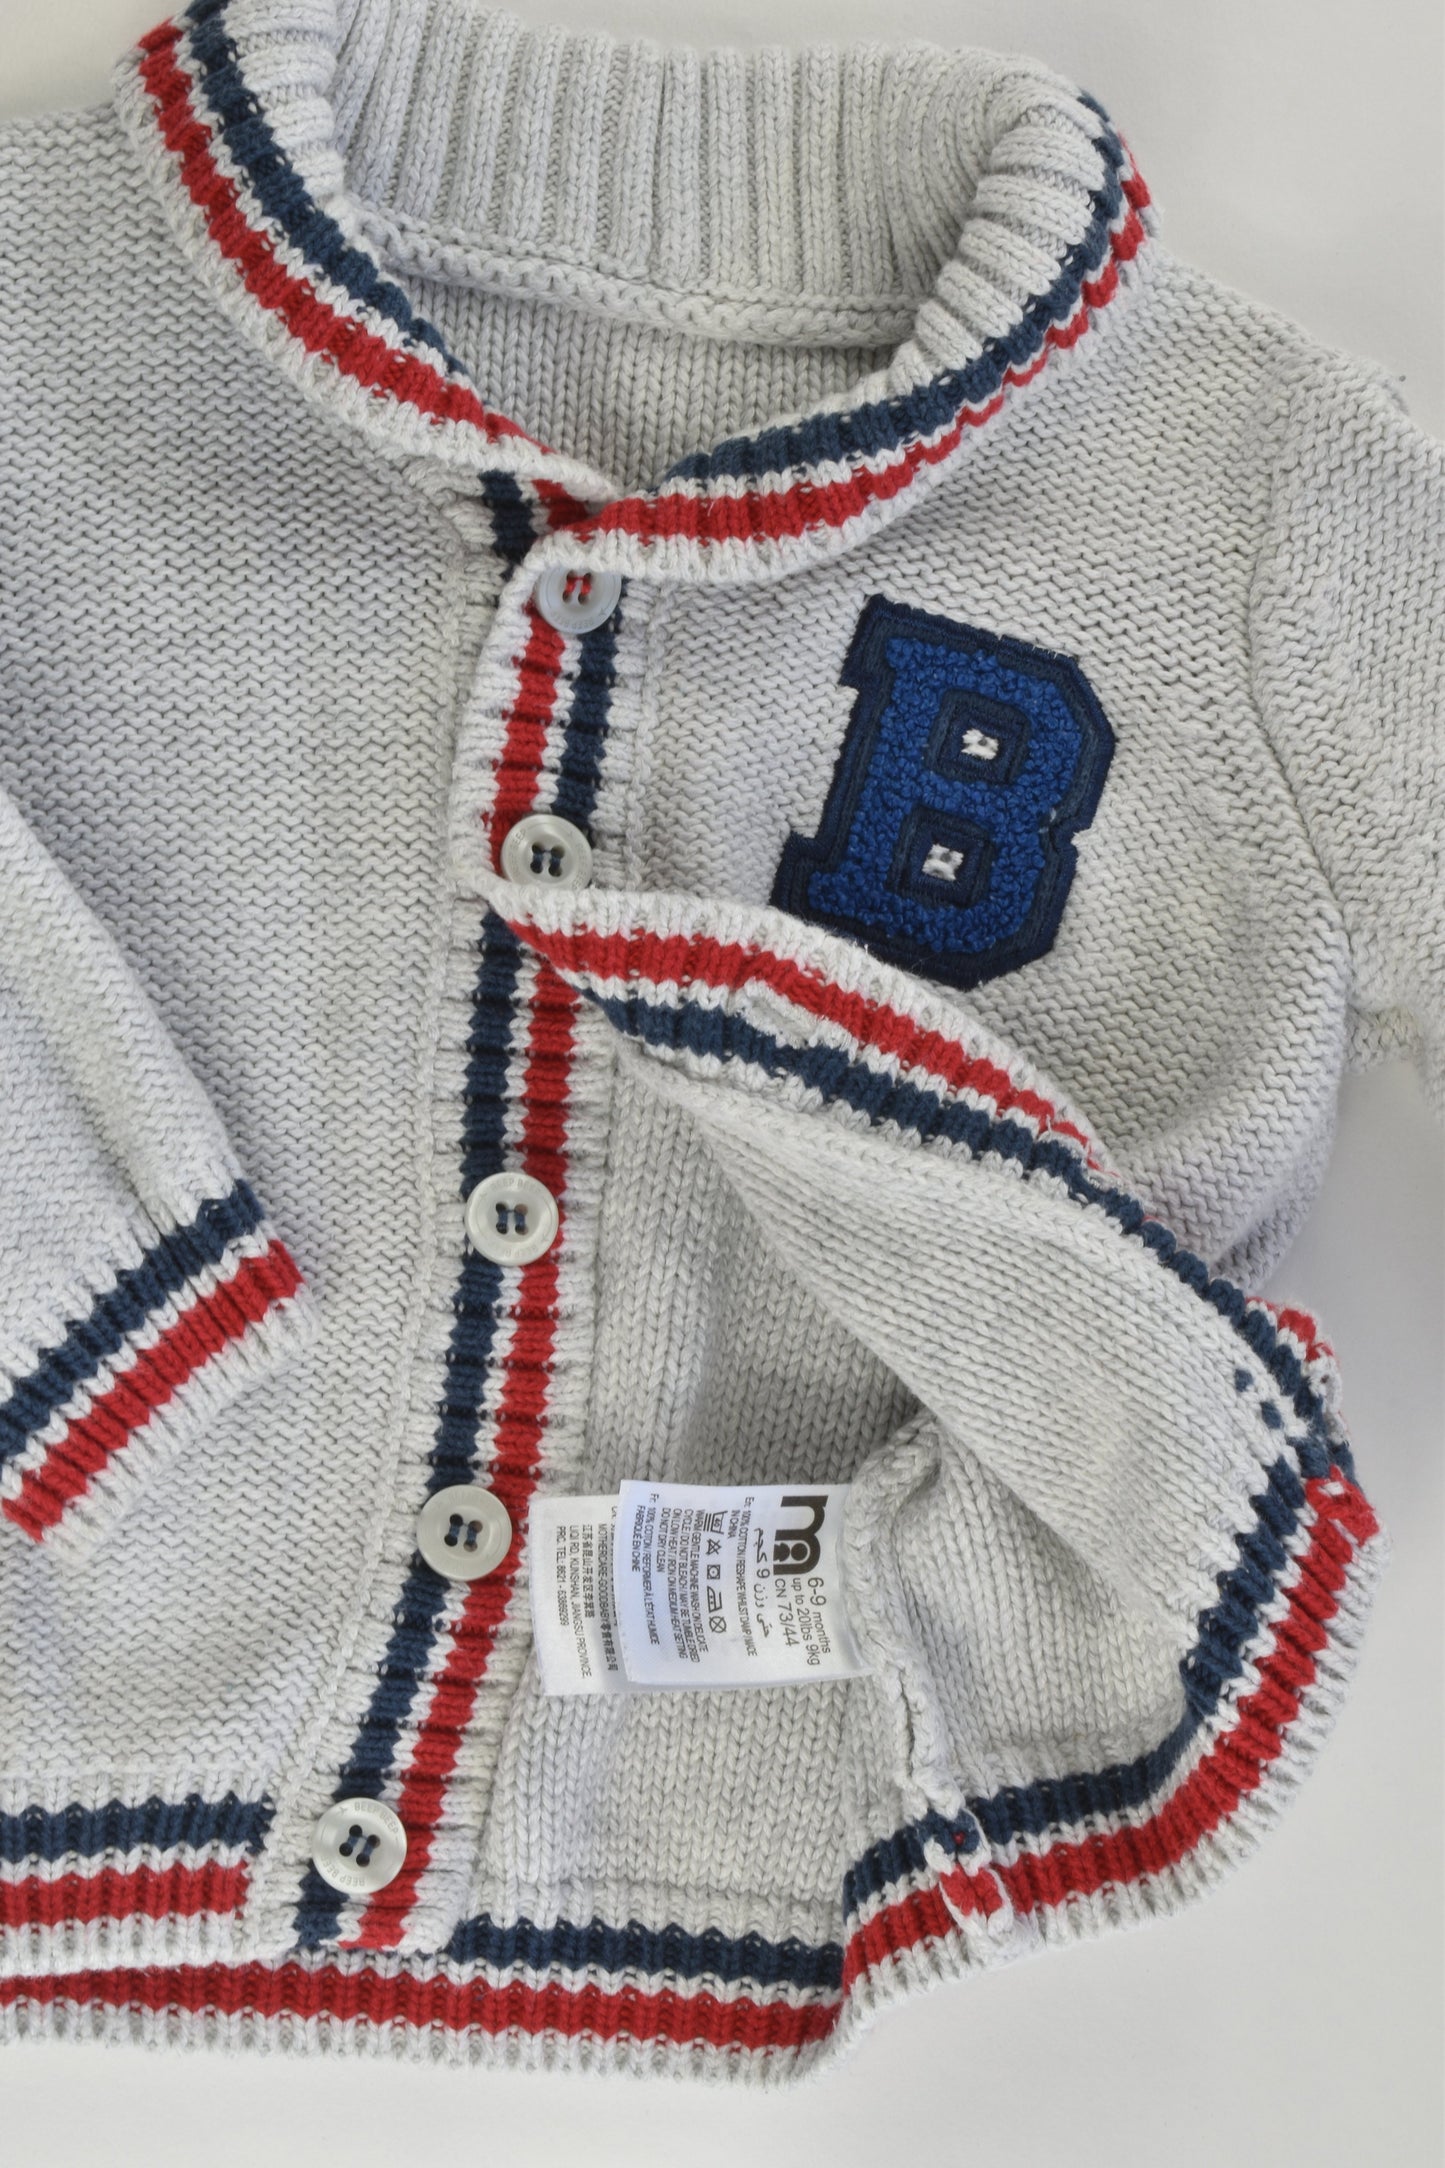 Mothercare Size 0 (6-9 months) Knitted Cardigan